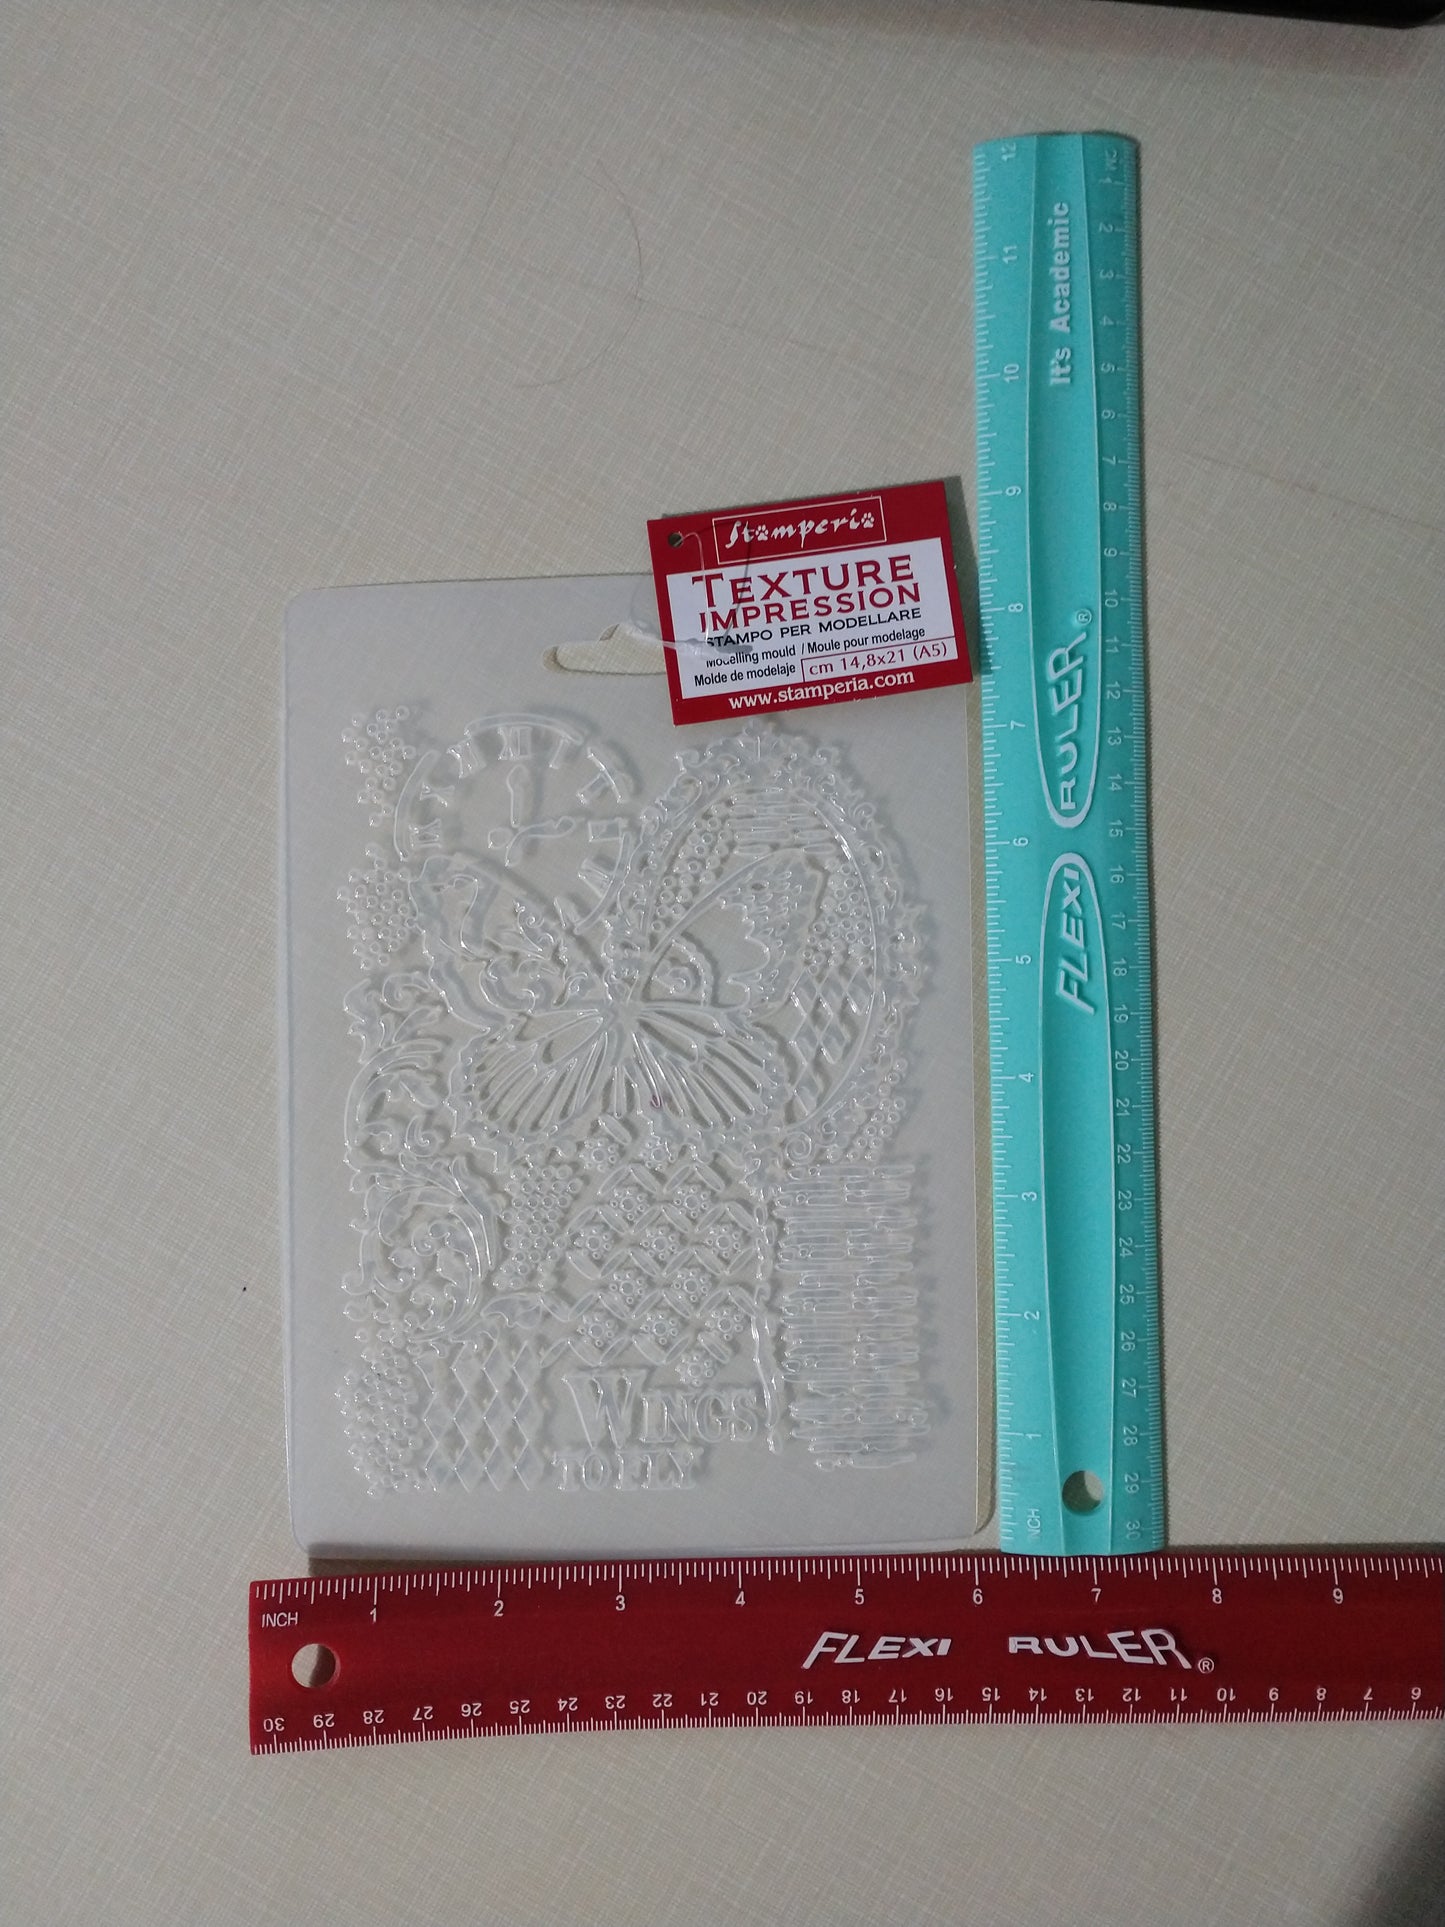 Butterfly & Manuscrip Soft mould